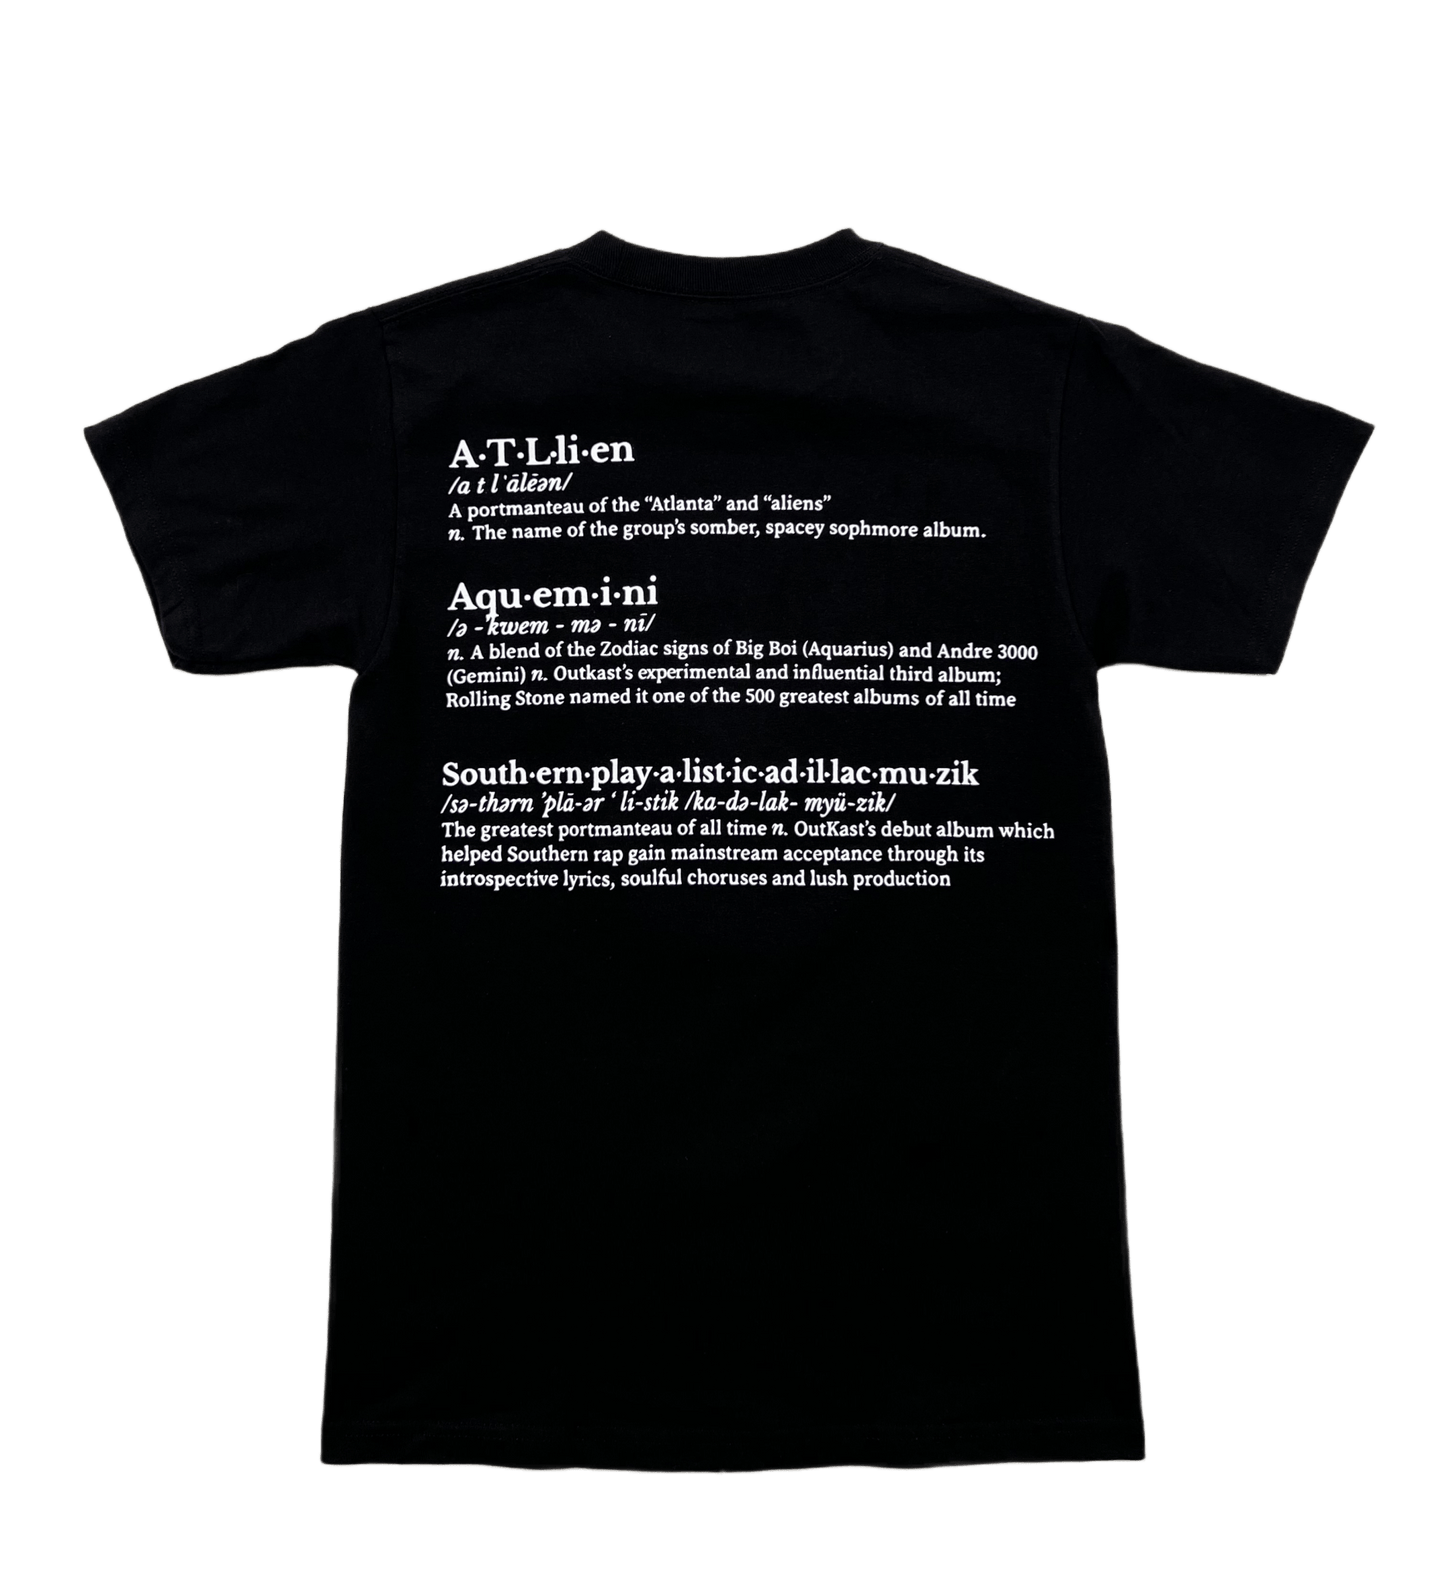 A PLEASURES black t-shirt with vocabulary pleasures written on it.